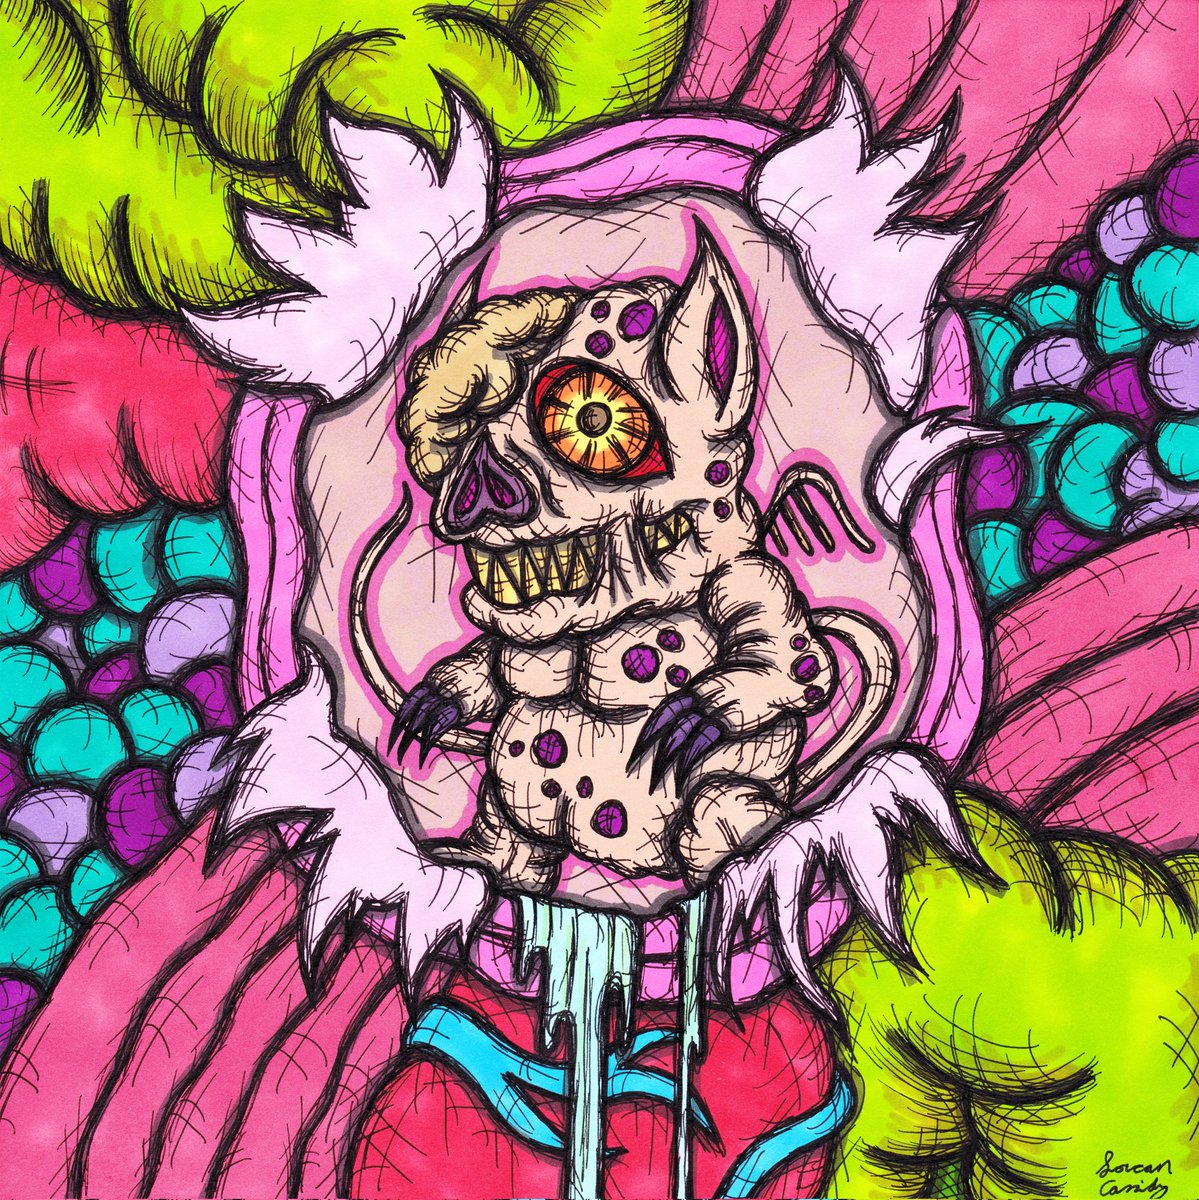 From filth and viscera it is born.
Happy birthday! 🥳
Done for @ArtClubIE's Birthday prompt.
#art #drawing #illustration #sketch #promarkers #ink #monster #creature #weird #strange #creepy #horror #gutsandgore #birthday #happybirthday #irishartist #ArtClubIE #lorcancassidy